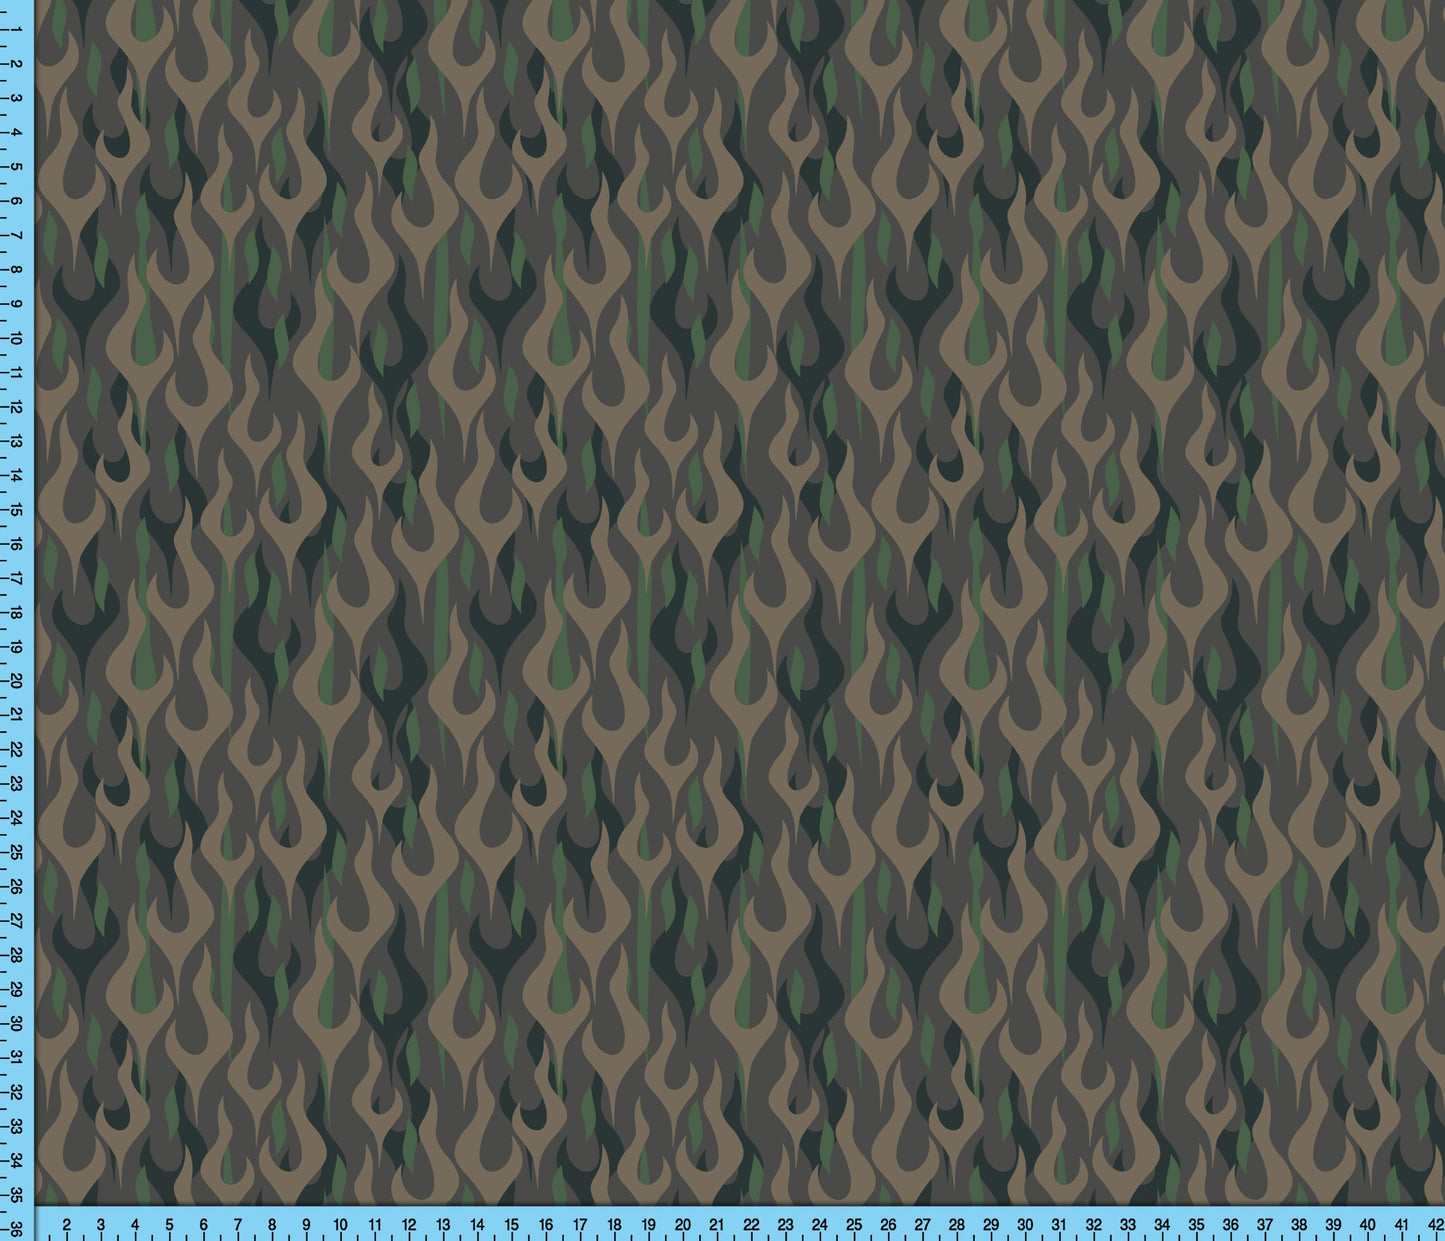 Desert Camouflage Flames Brown Green Tan Fabric Print, Tribal Tattoo Fire Design Printed By the Yard